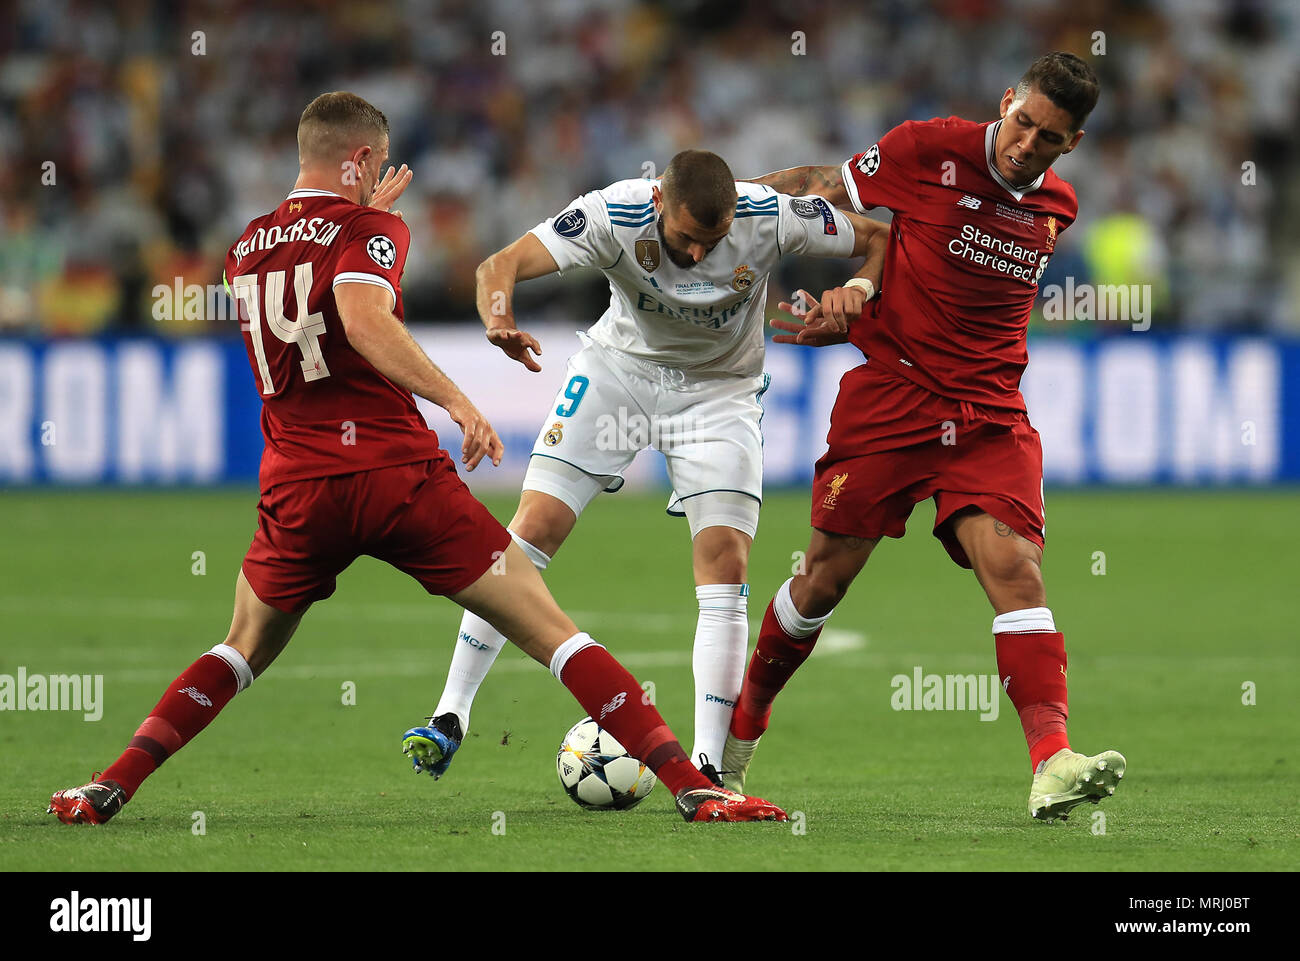 Liverpool's Jordan Henderson (left) and Roberto Firmino (right) battle for the ball with Real Madrid's Karim Benzema (centre) during the UEFA Champions League Final at the NSK Olimpiyskiy Stadium, Kiev. PRESS ASSOCIATION Photo. Picture date: Saturday May 26, 2018. See PA story SOCCER Champions League. Photo credit should read: Mike Egerton/PA Wire Stock Photo